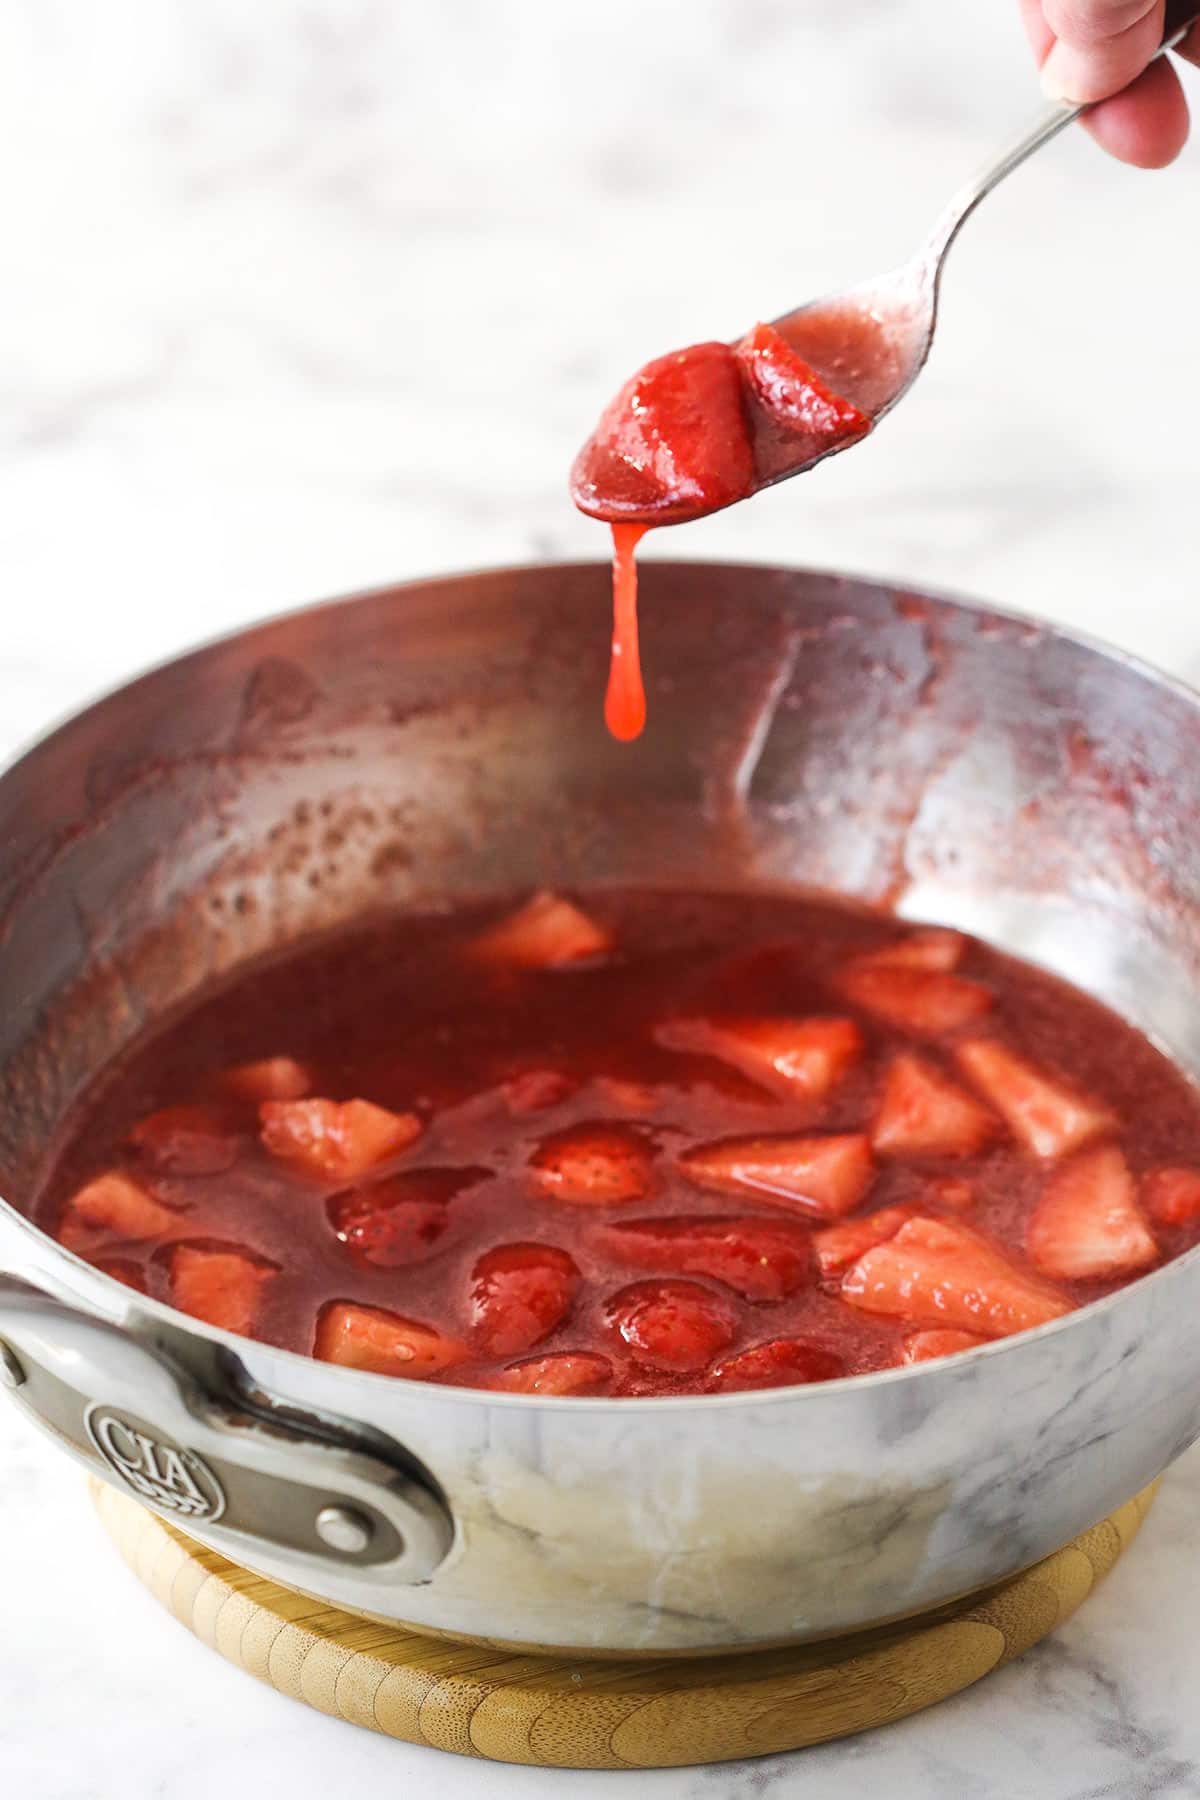 Strawberry sauce in a saucepan with a spoon dipping into it.